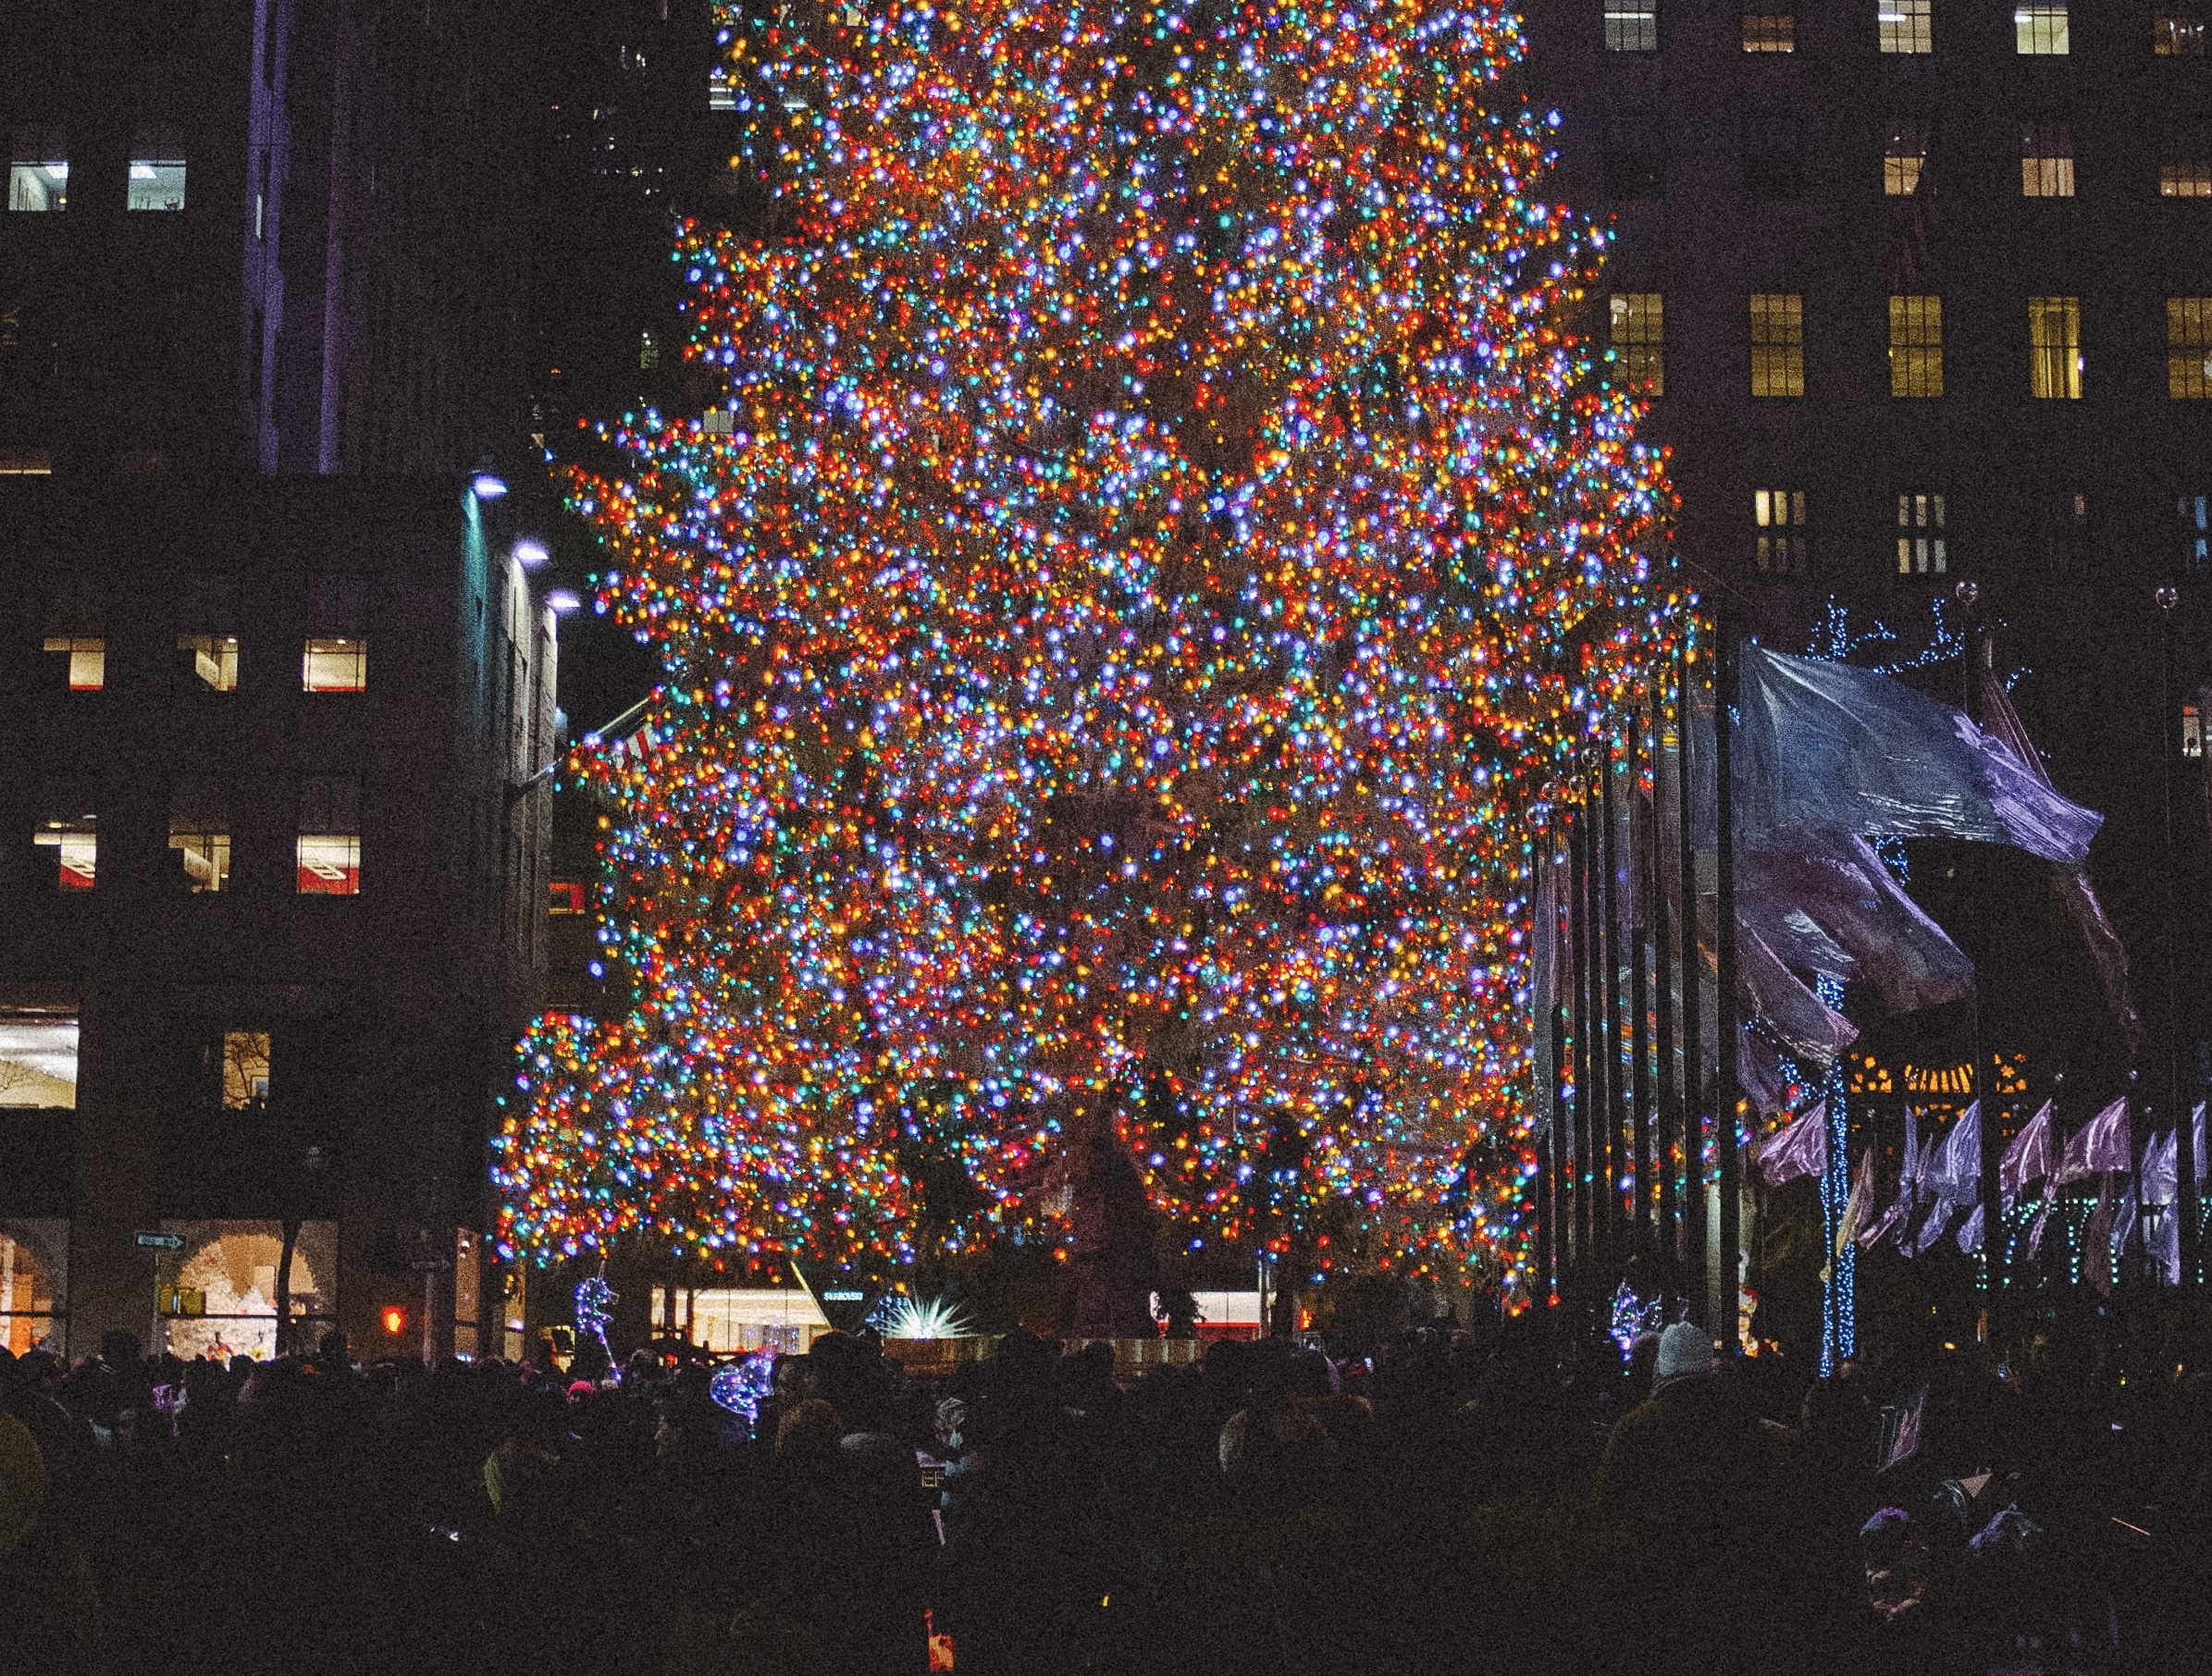 The Rockefeller Christmas Tree is a well celebrated trademark of NYC during the holidays.
Pictured: people surrounding the Rockefeller Christmas Tree  at night while it is lit up with Christmas lights 